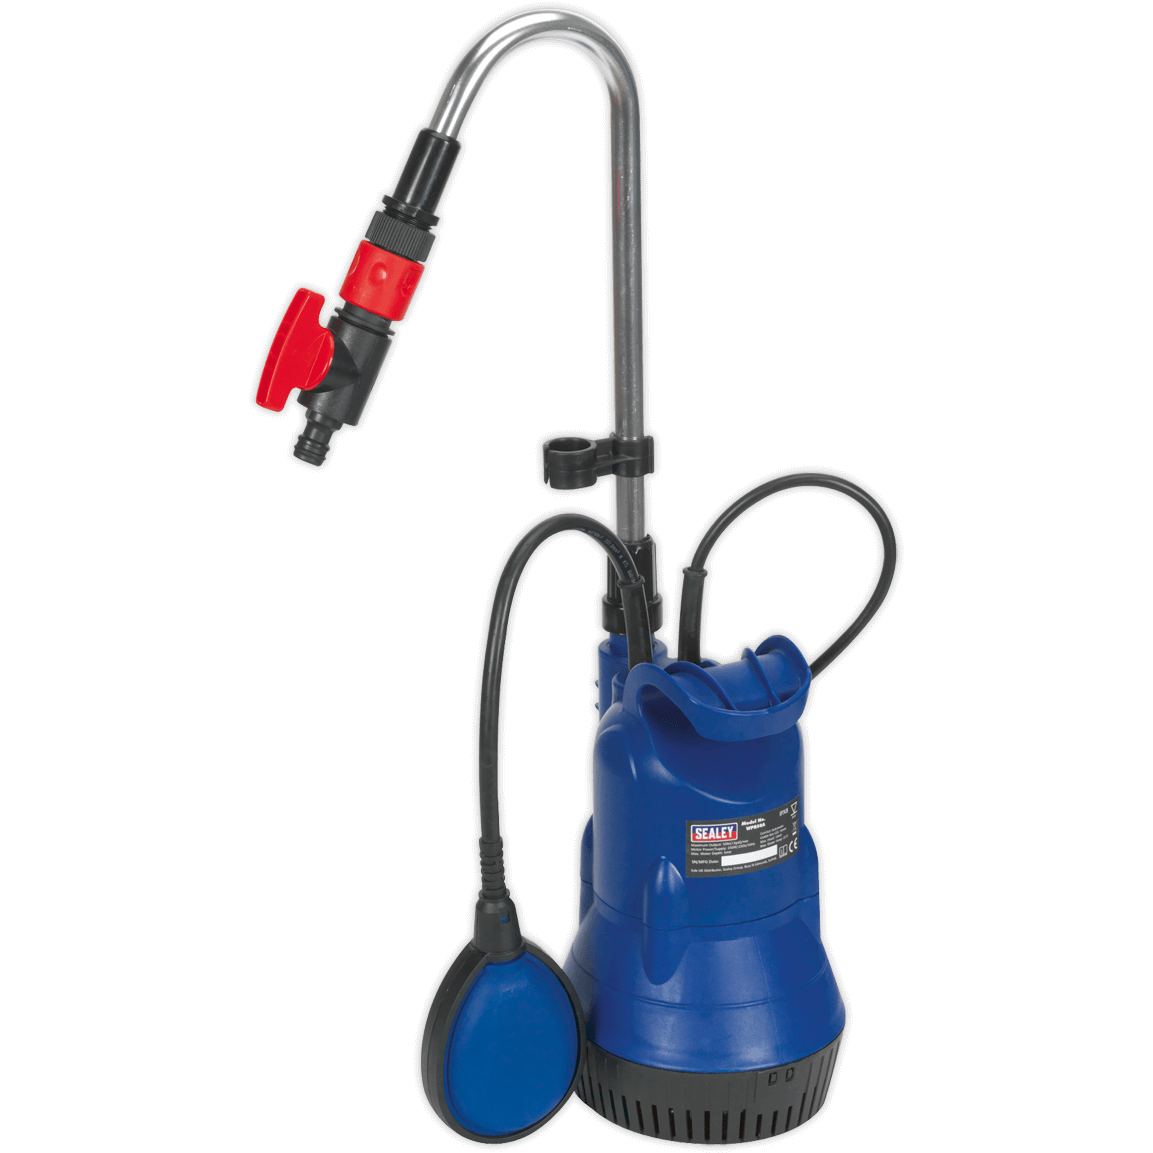 Sealey WPB50A Submersible Water Butt Pump 240v